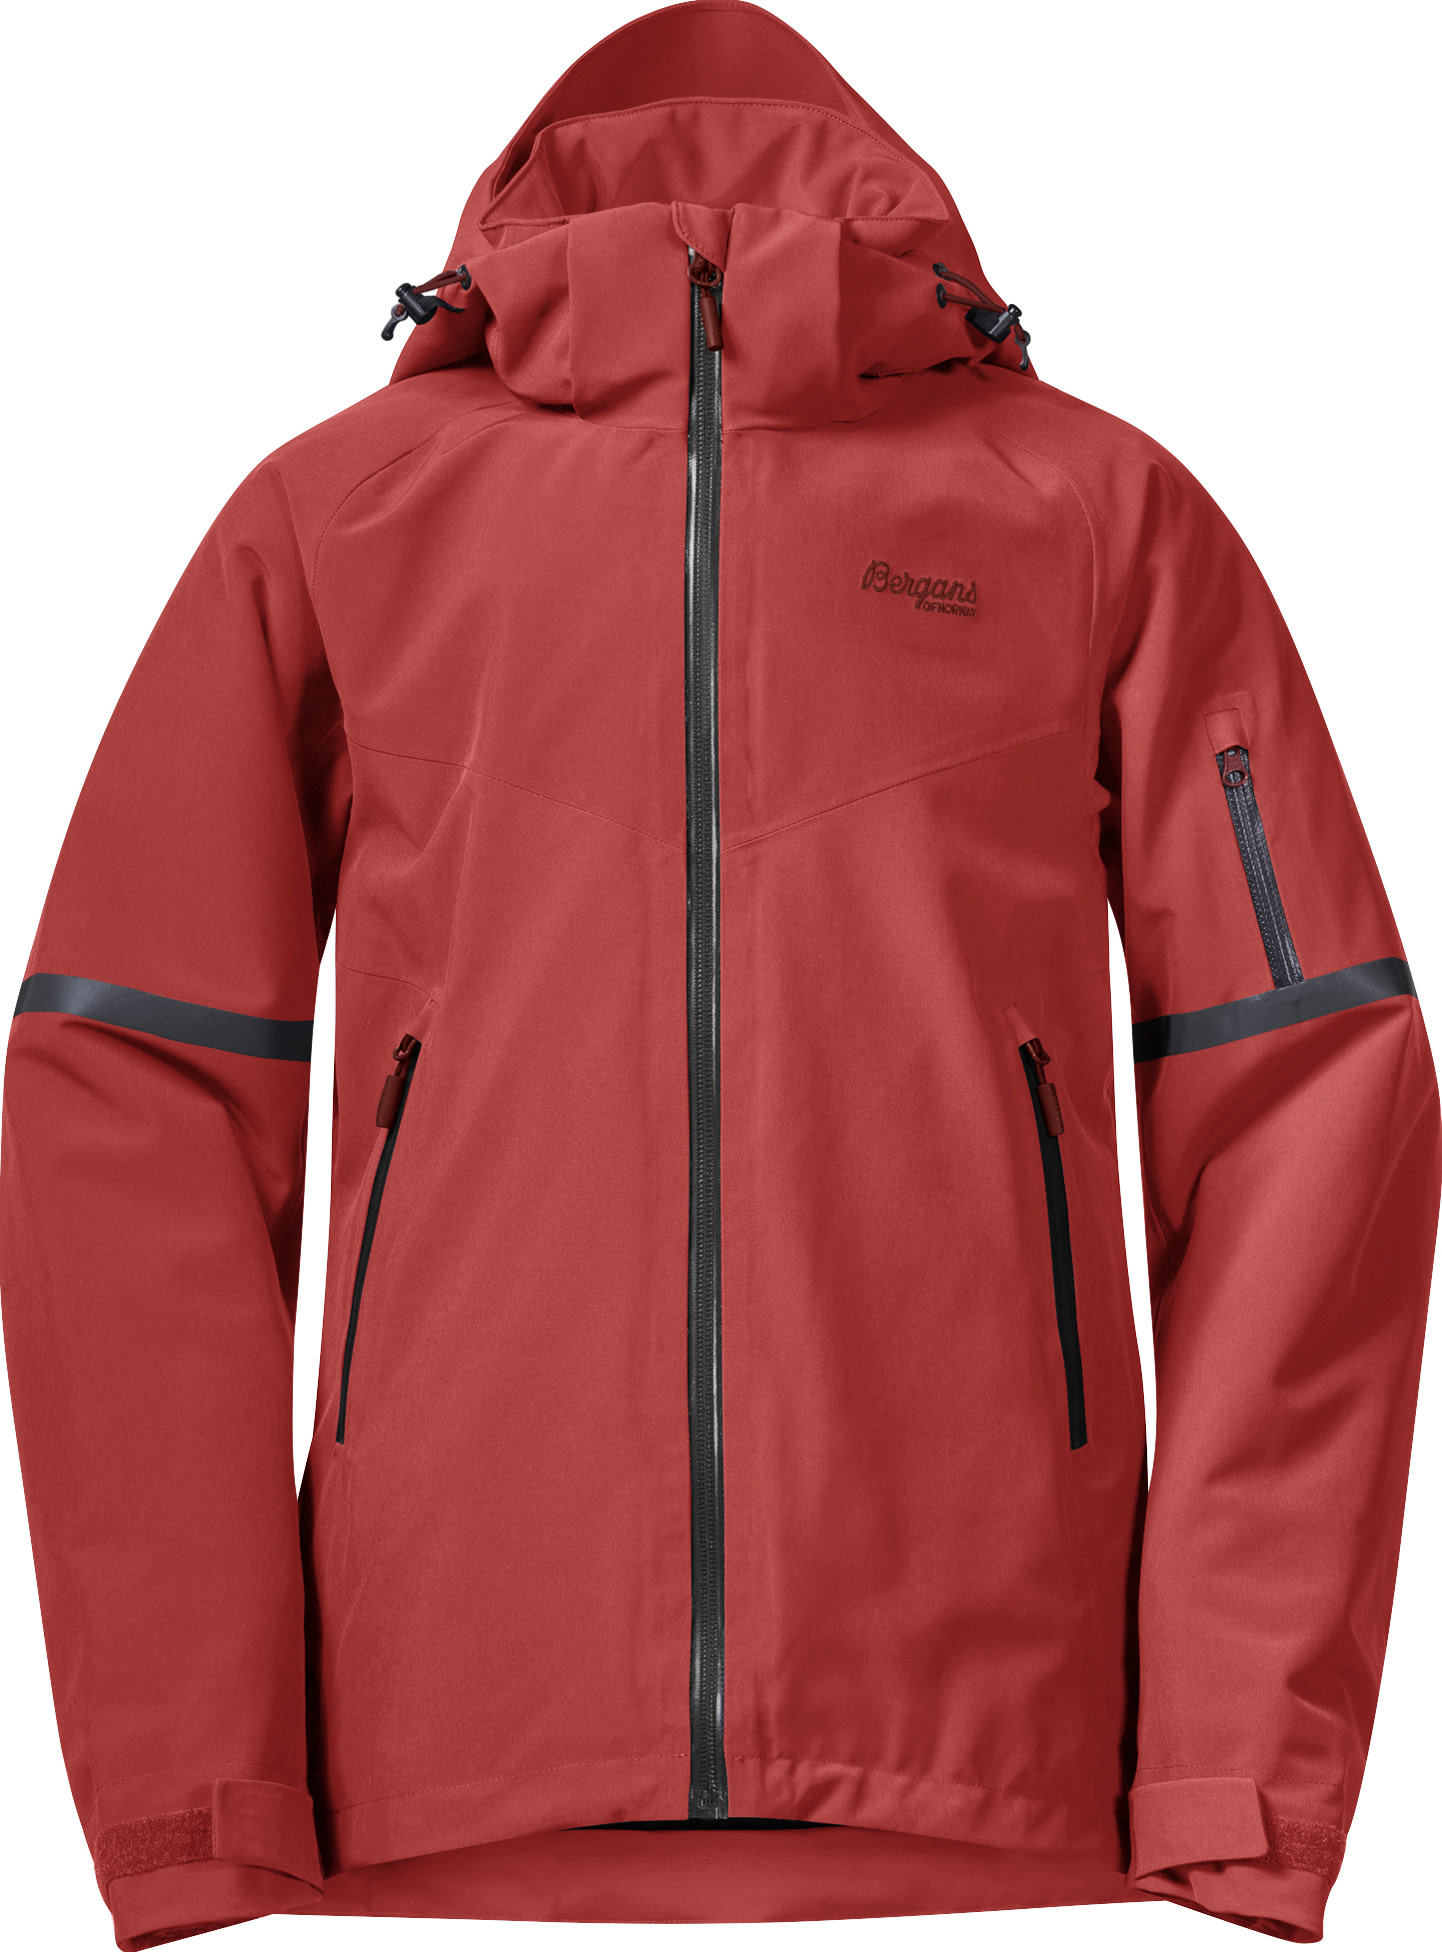 Girls' Oppdal Insulated Youth Jacket Rusty Dust